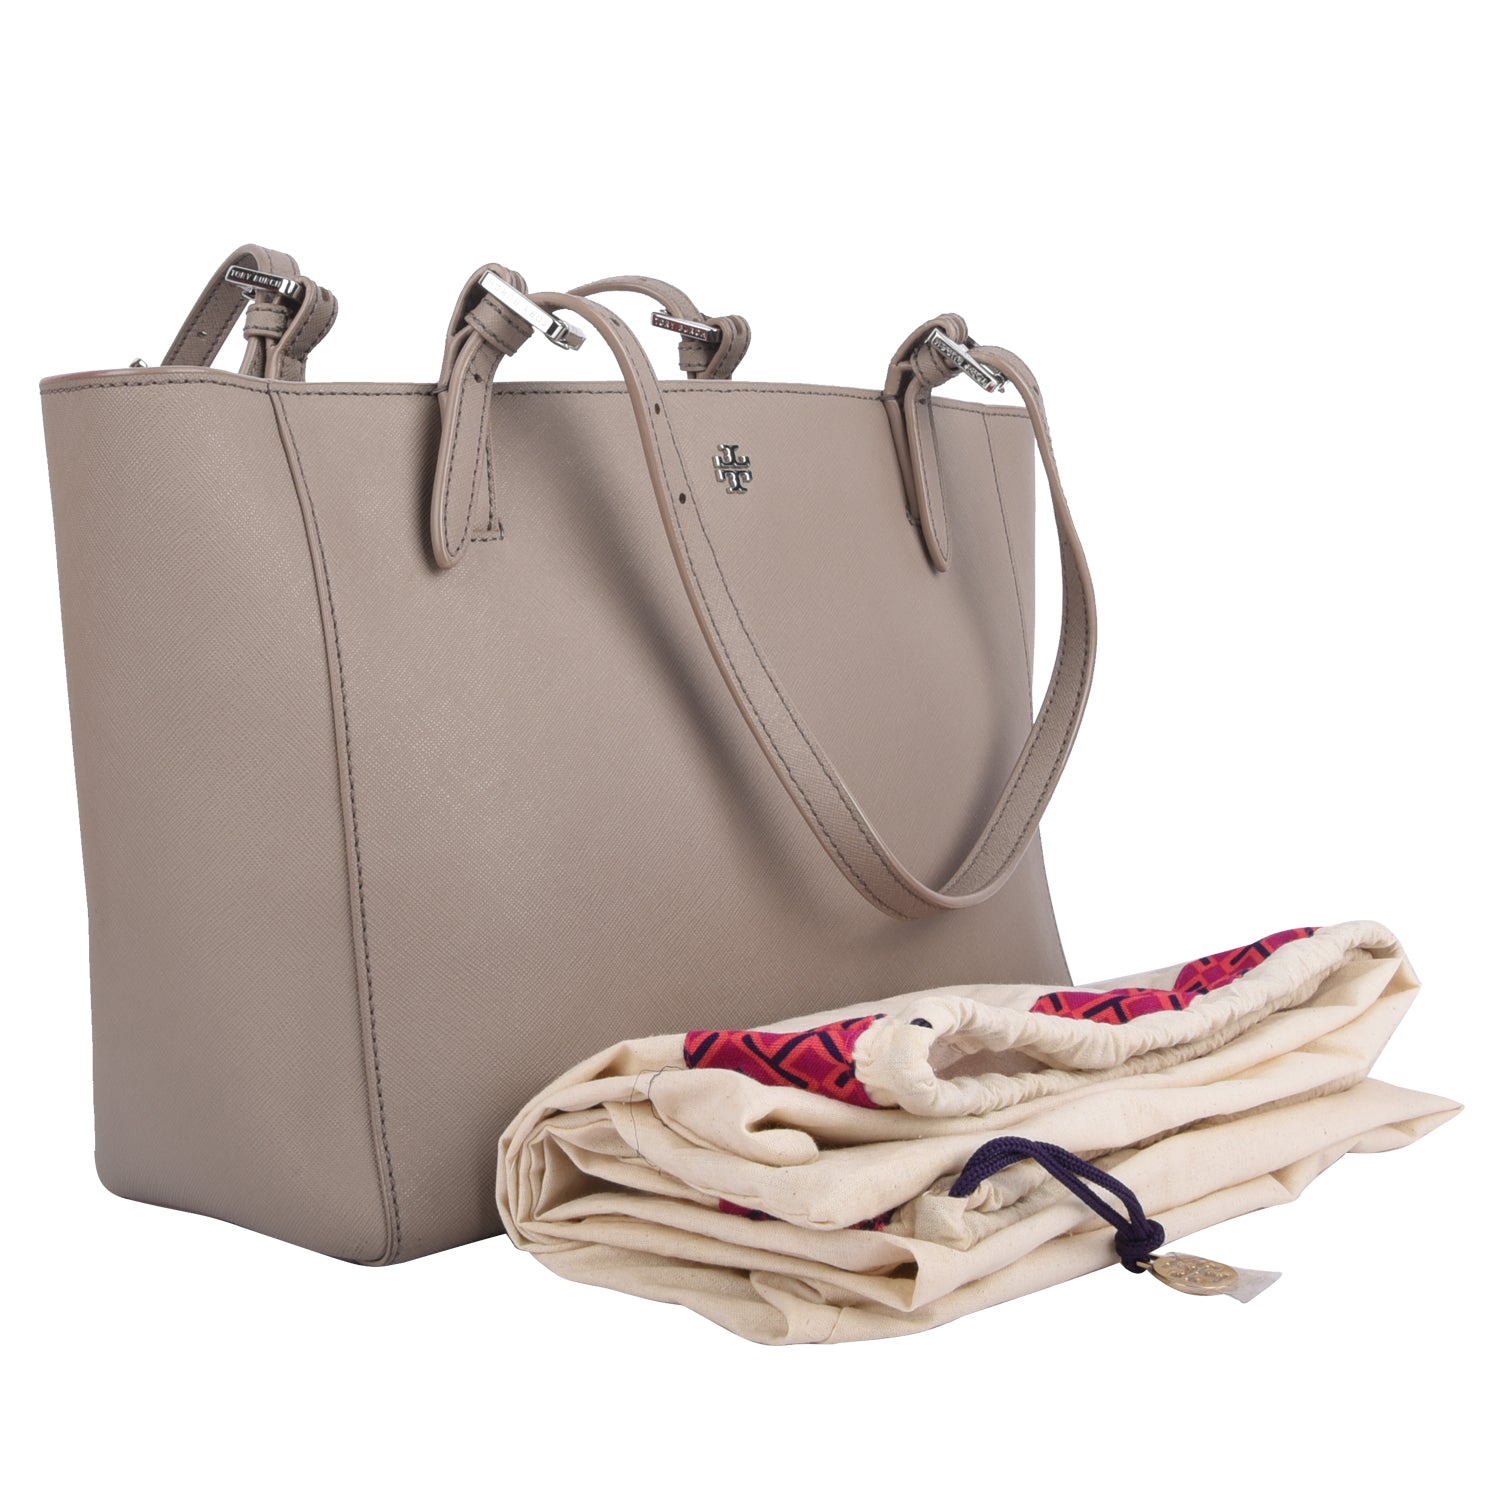 Tory Burch Grey Leather Tote Bag